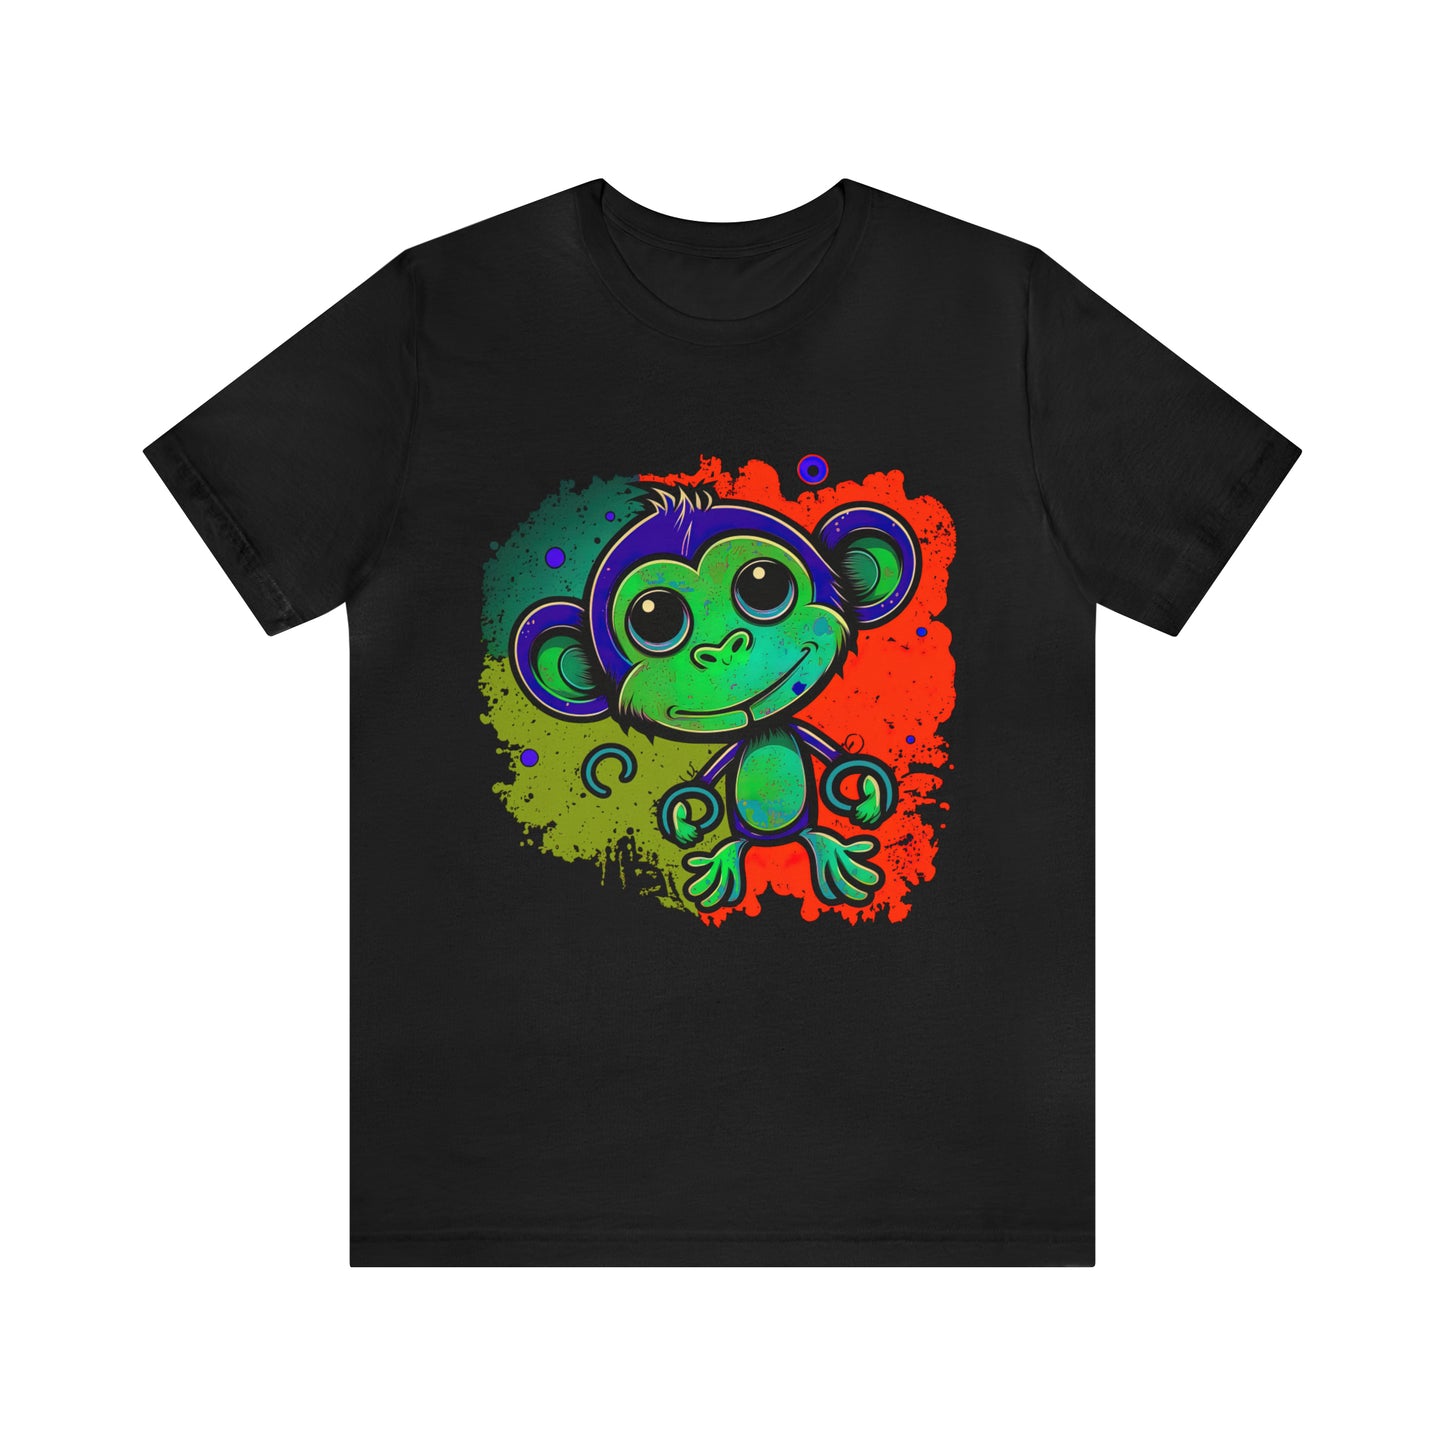 psychedelicBRANDz's Vibrant Forest Frolic featuring a monkey in a psychedelic design on a black shirt